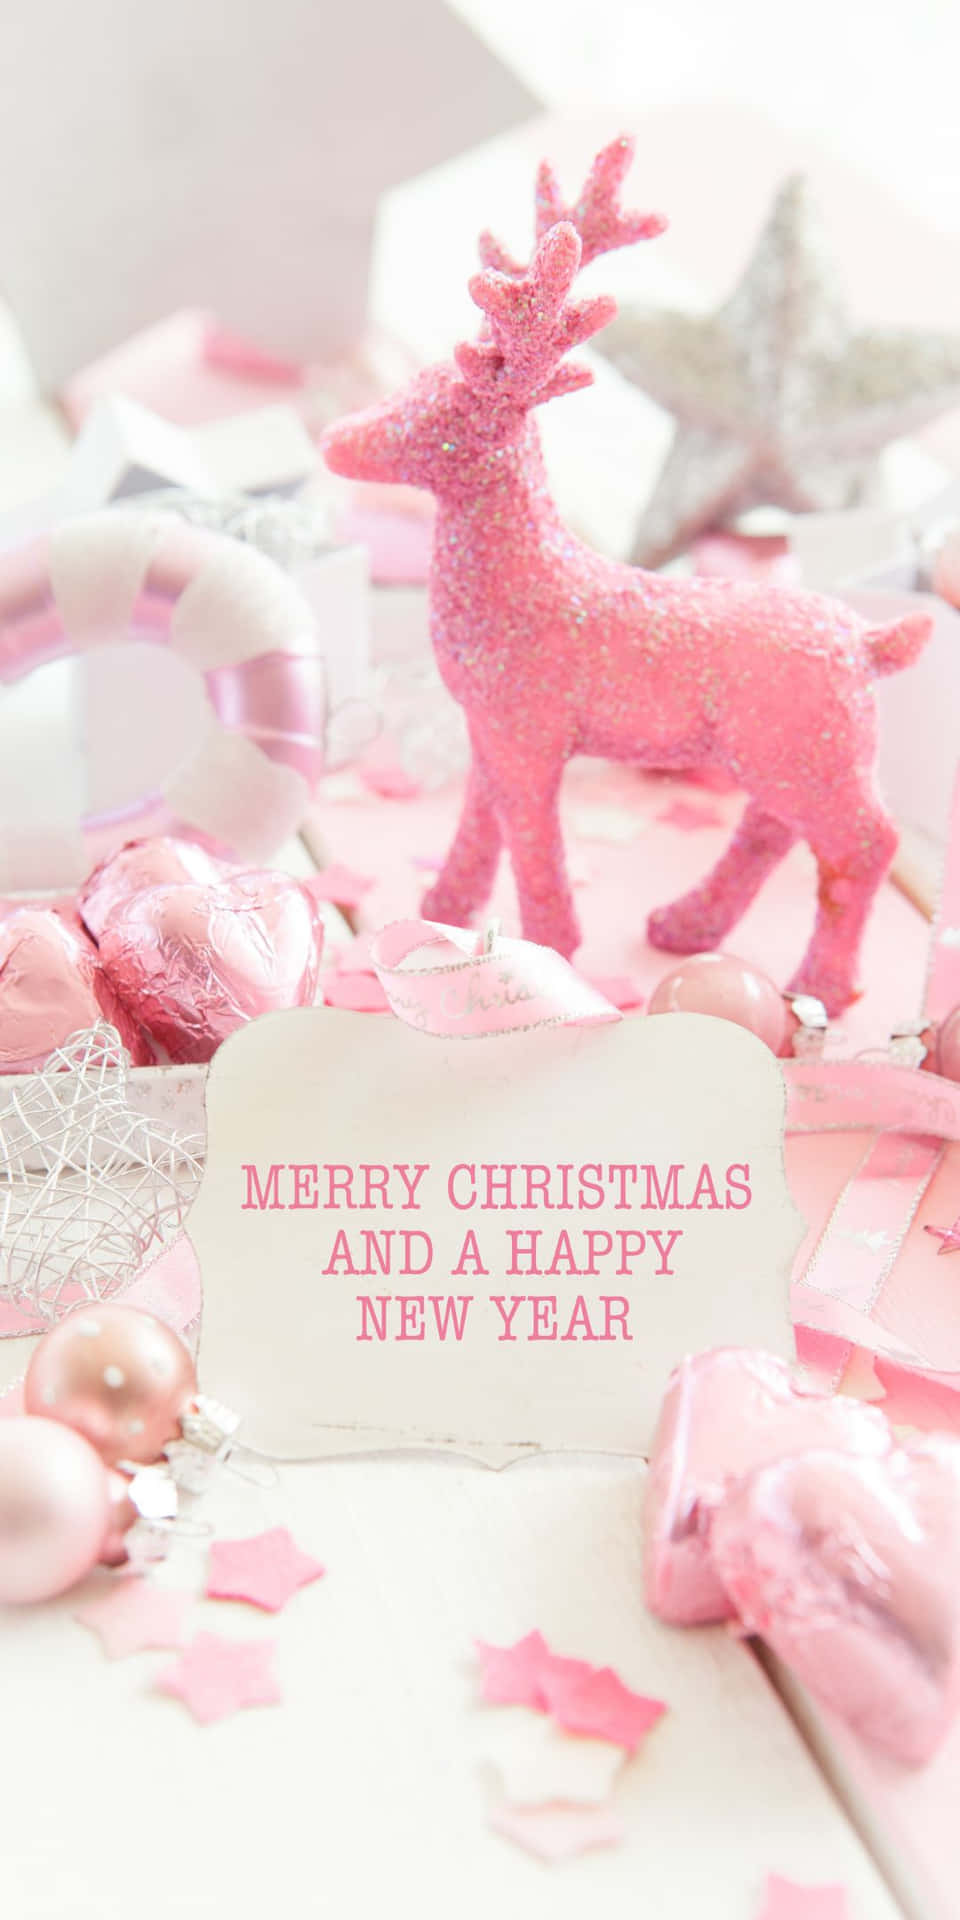 Image  A Warm and Colorful Pink Christmas Scene